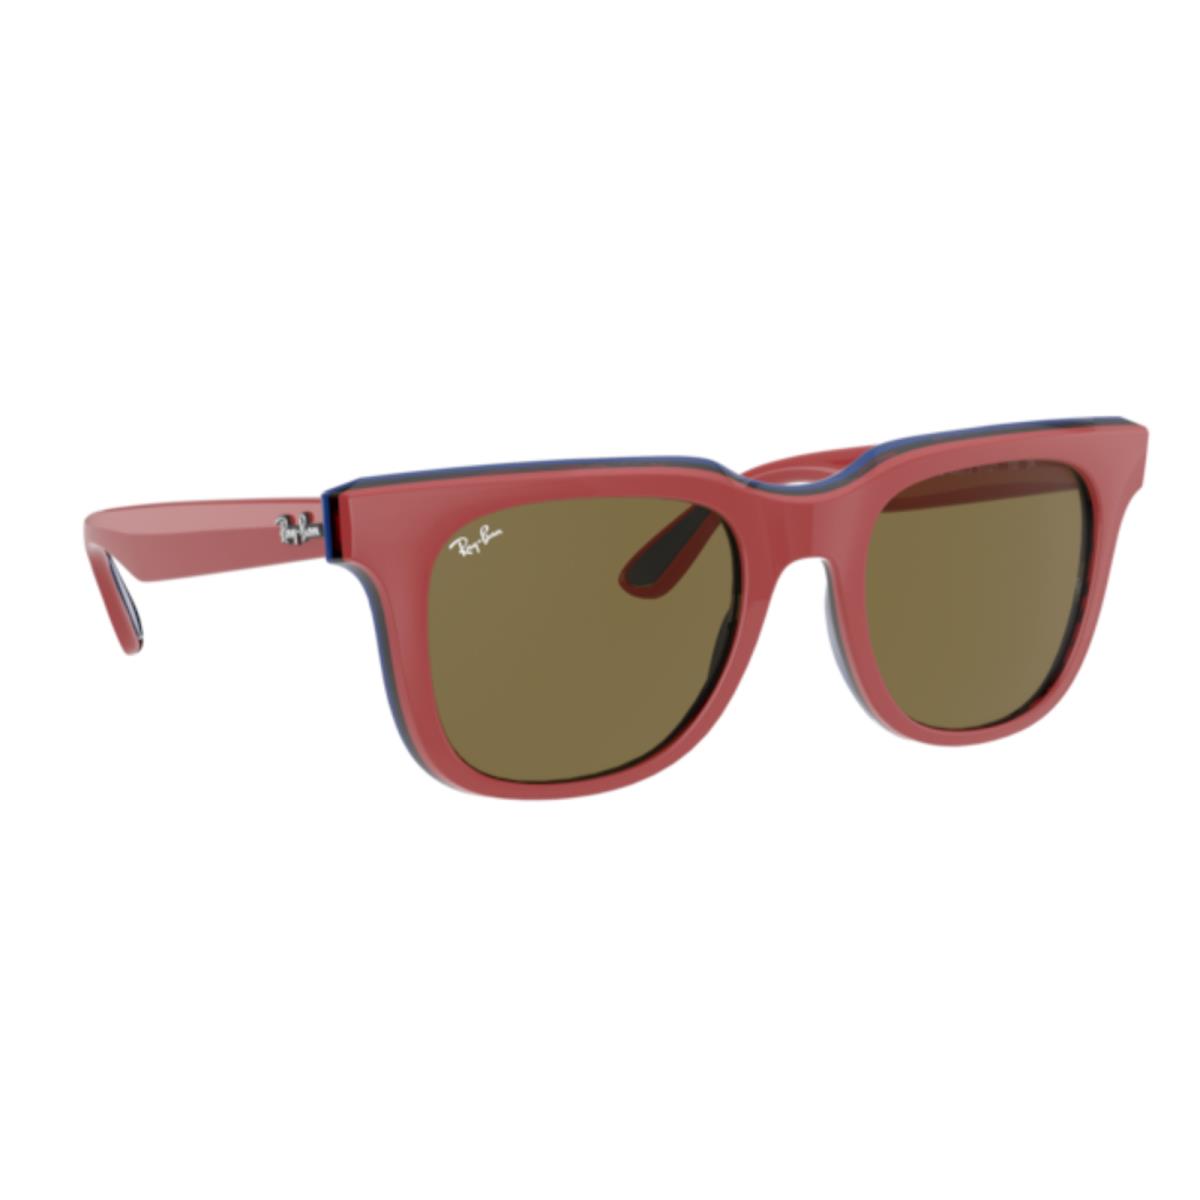 Ray-ban Sunglasses RB 4368 6522/73 51-21 150 Red Black Blue w/ Brown Lenses